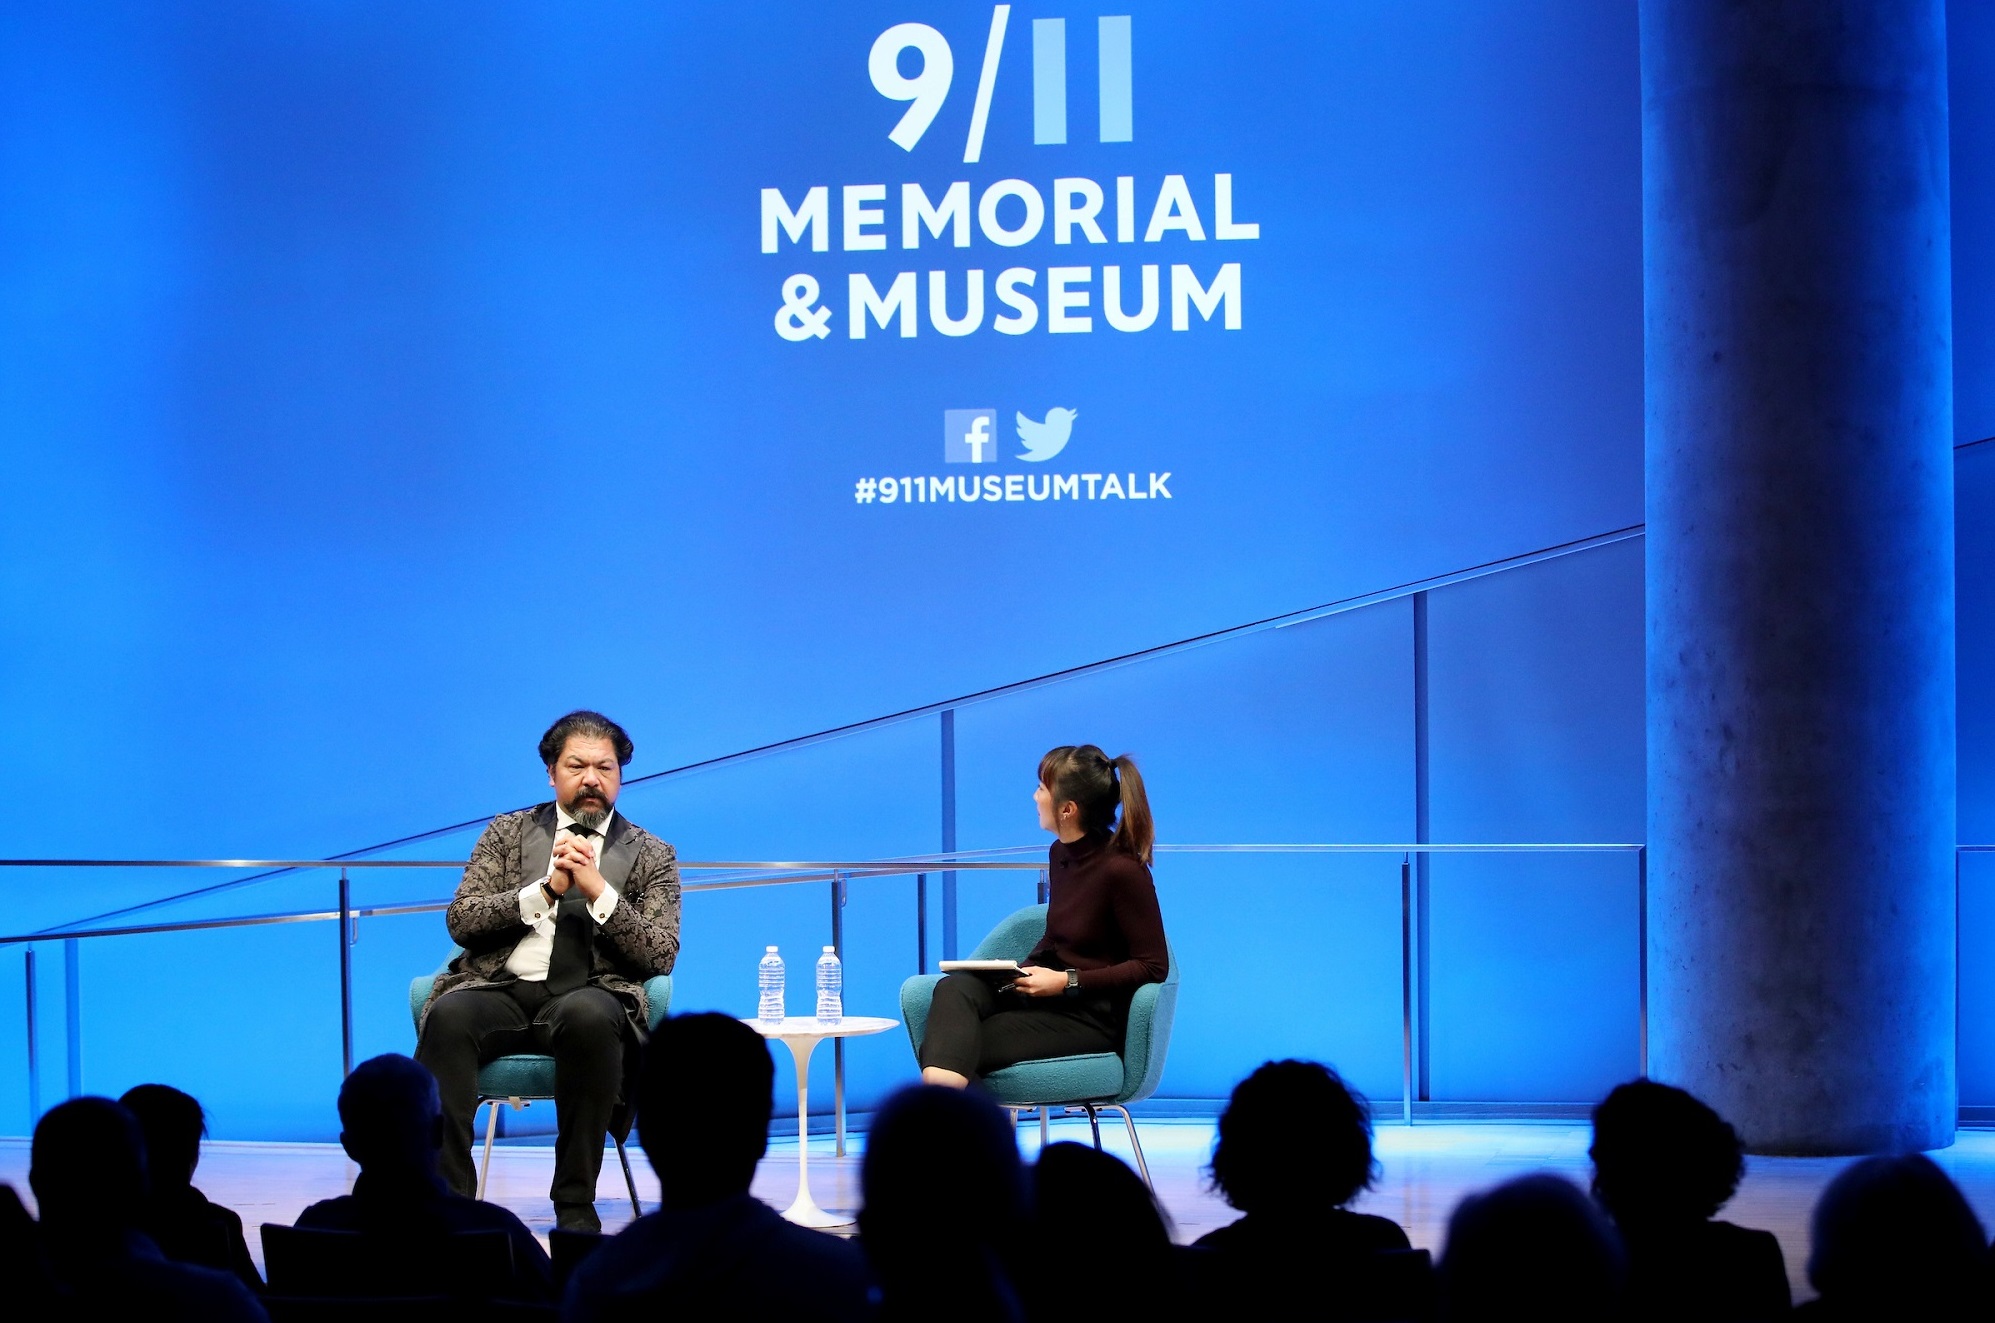 This wide-angle photo of the Museum Auditorium shows Cellist Karim Wasfi and a woman hosting the event seated onstage in the distance. Wasfi has his hands clasped together as he speaks. A wall behind the two participants is lit blue and features the logo of the 9/11 Memorial & Museum.